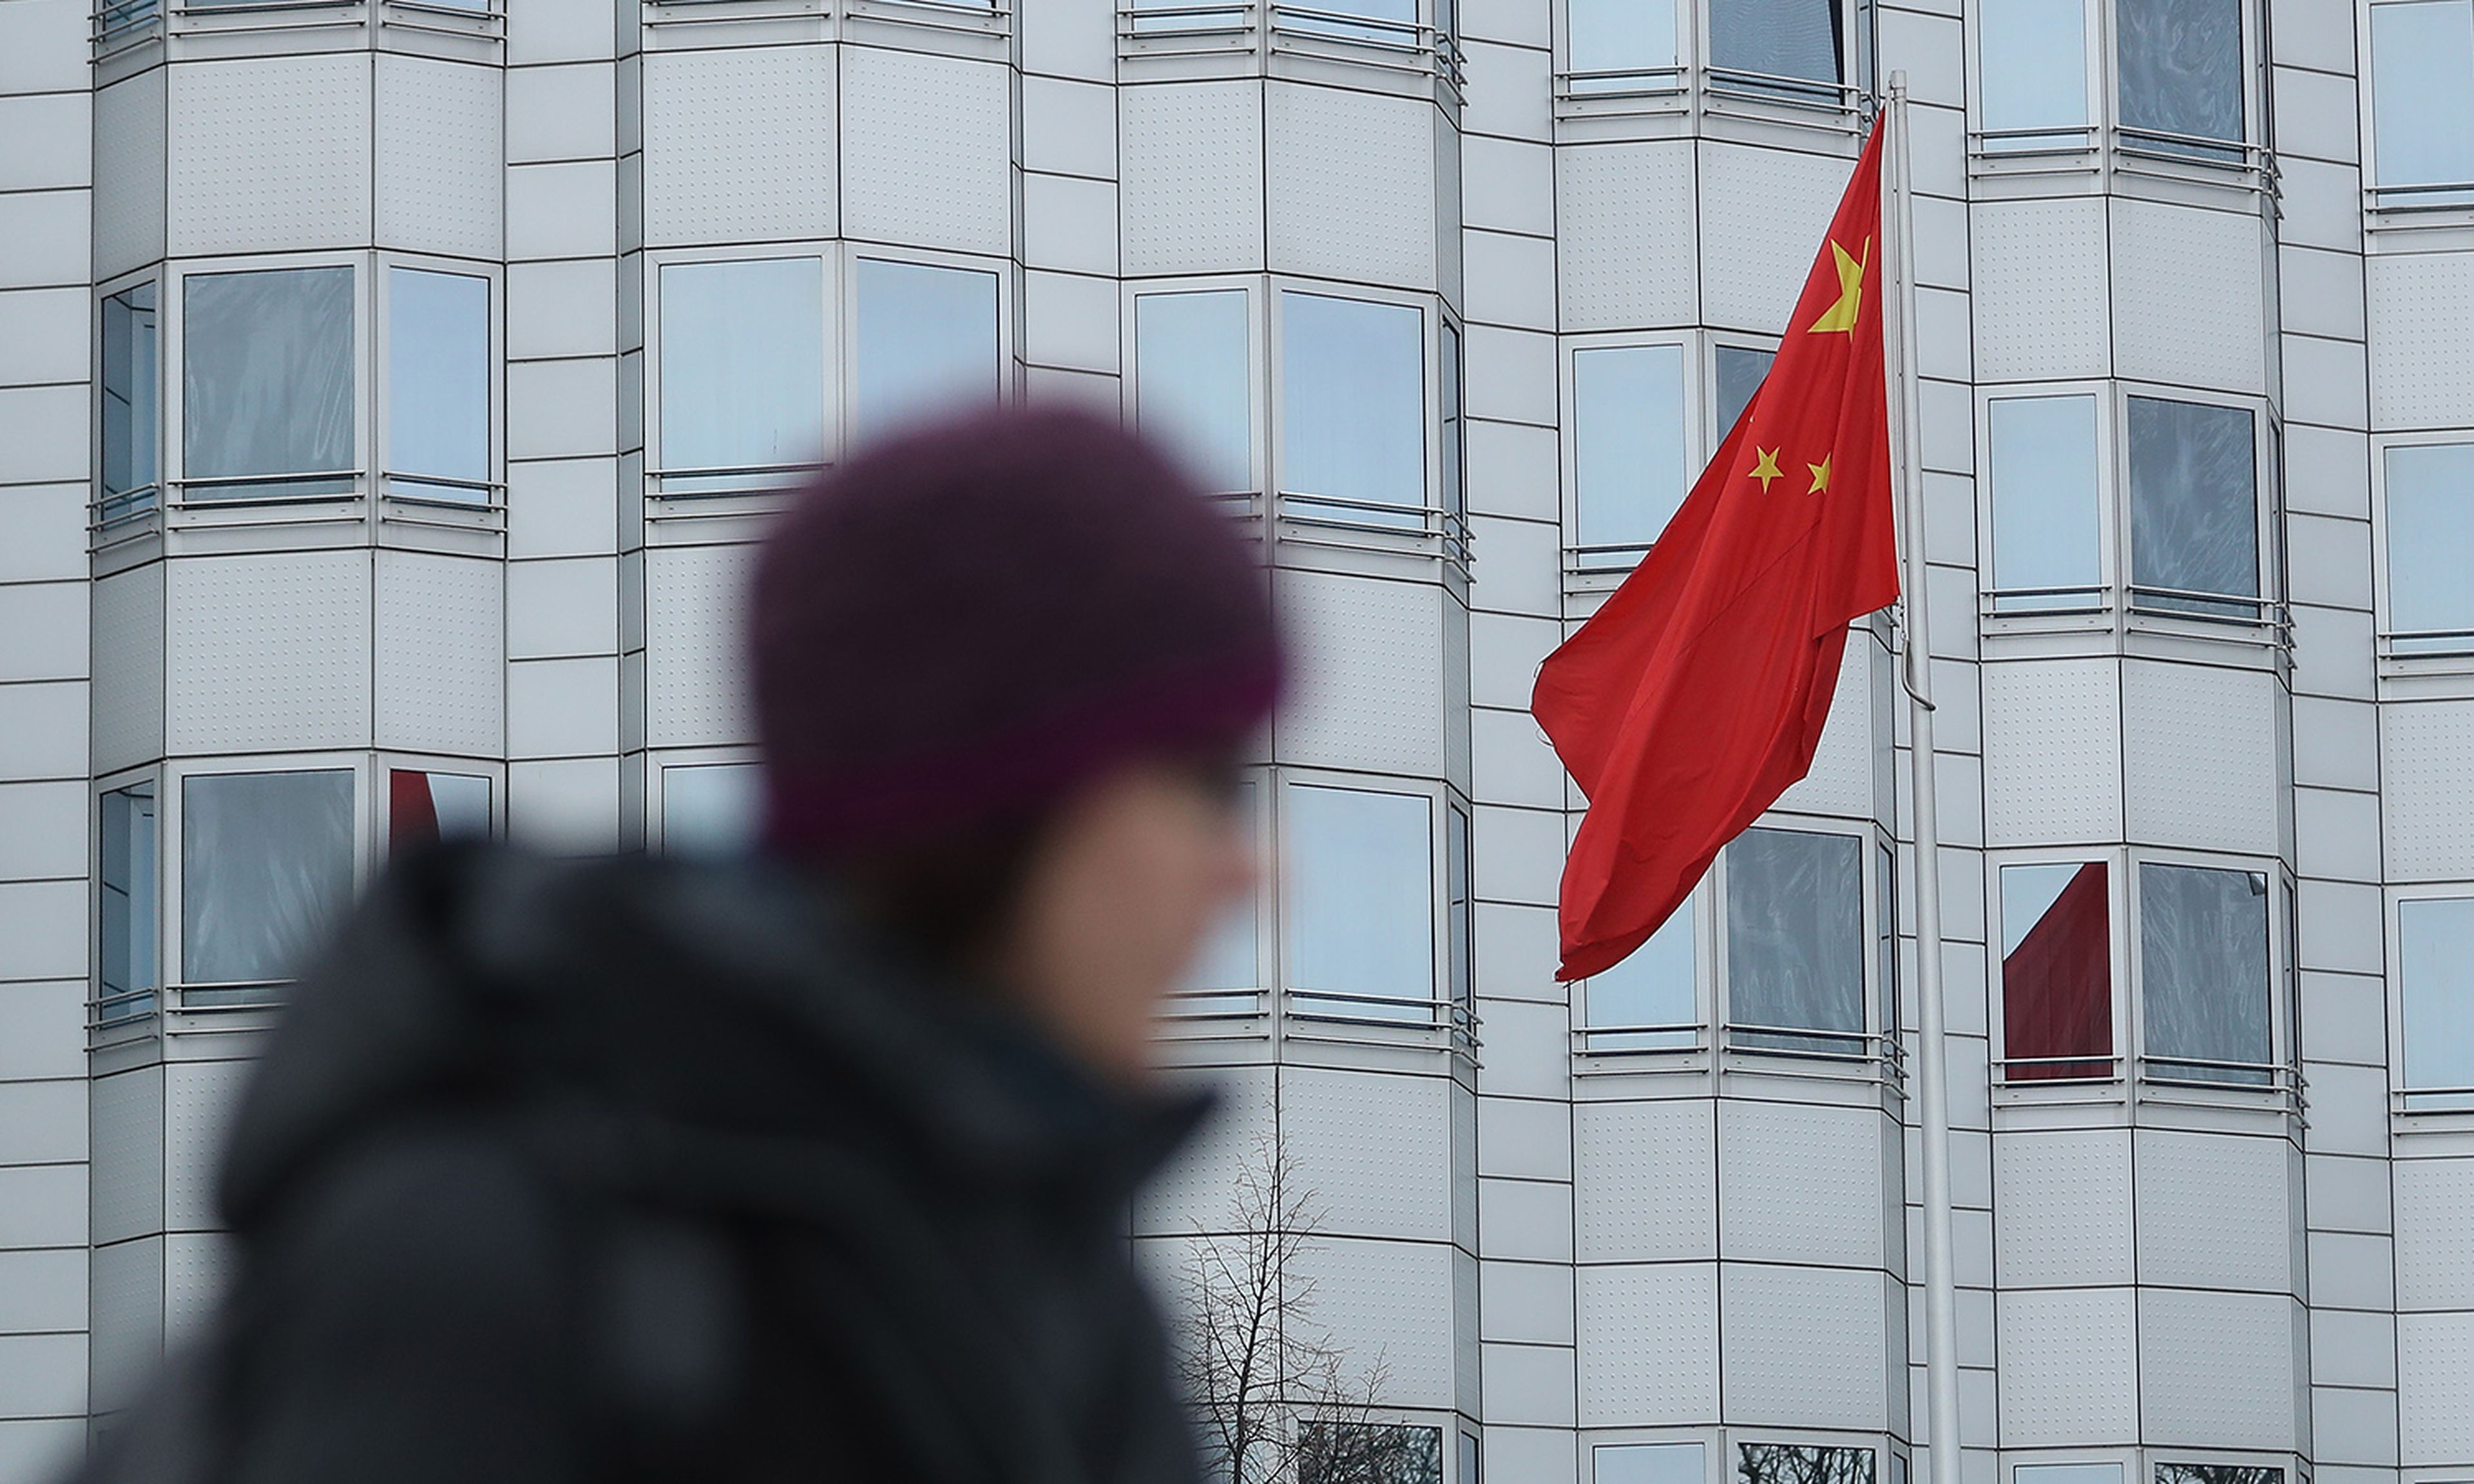 A woman walks past the Chinese Embassy on Dec. 11, 2017, in Berlin. (Photo by Sean Gallup/Getty Images)